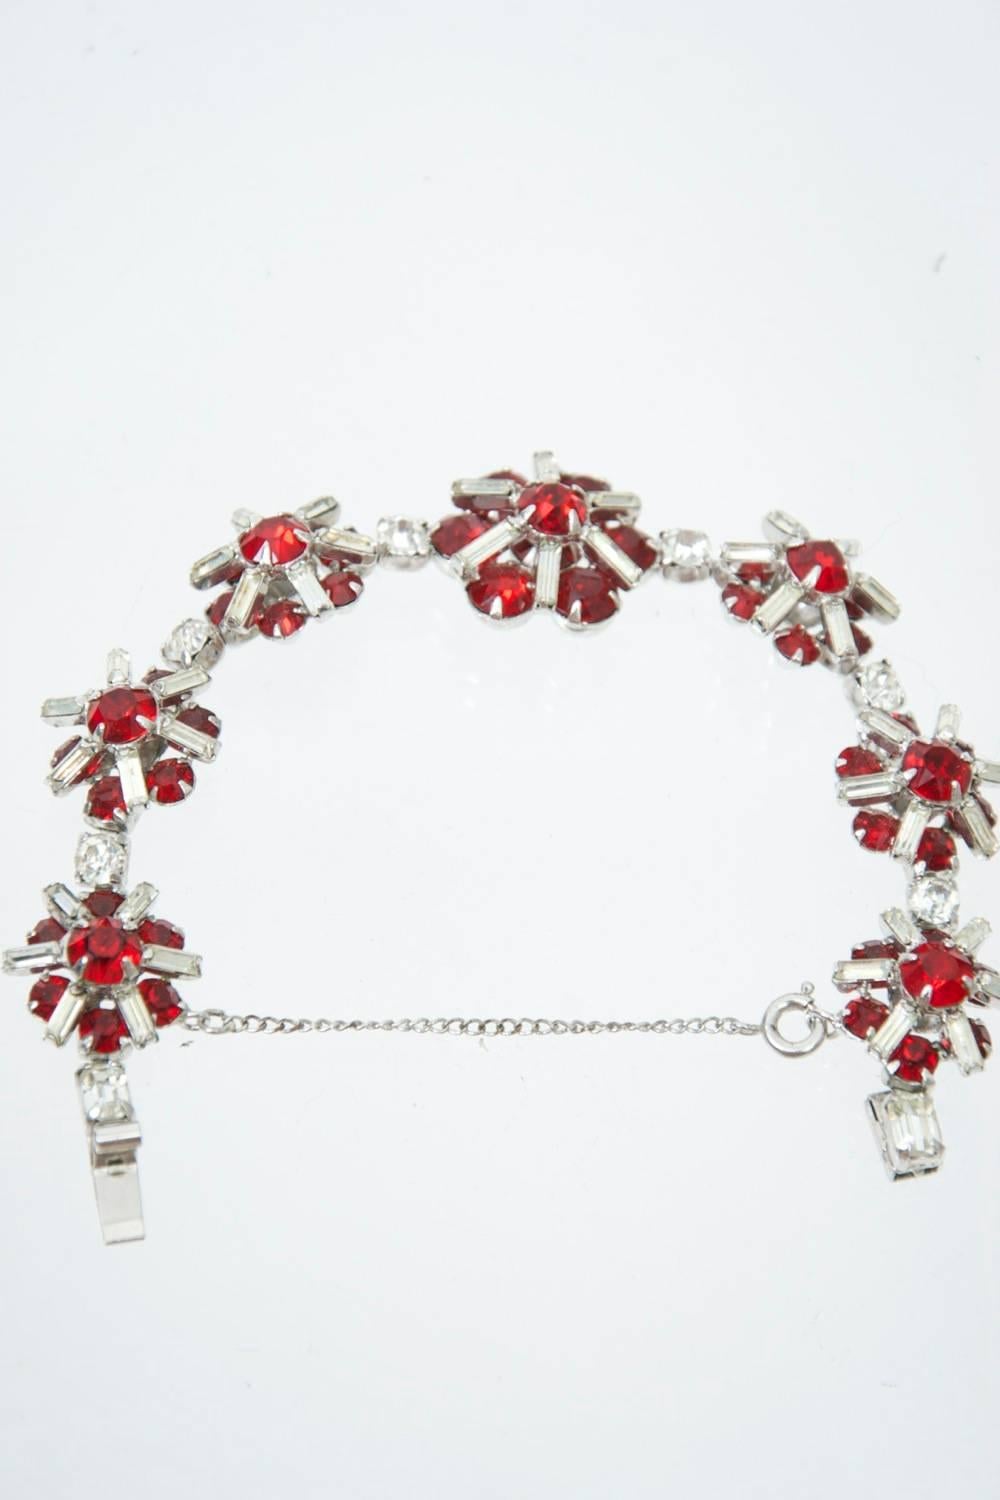 Kramer Rhinestone/Ruby Bracelet In Excellent Condition For Sale In Alford, MA